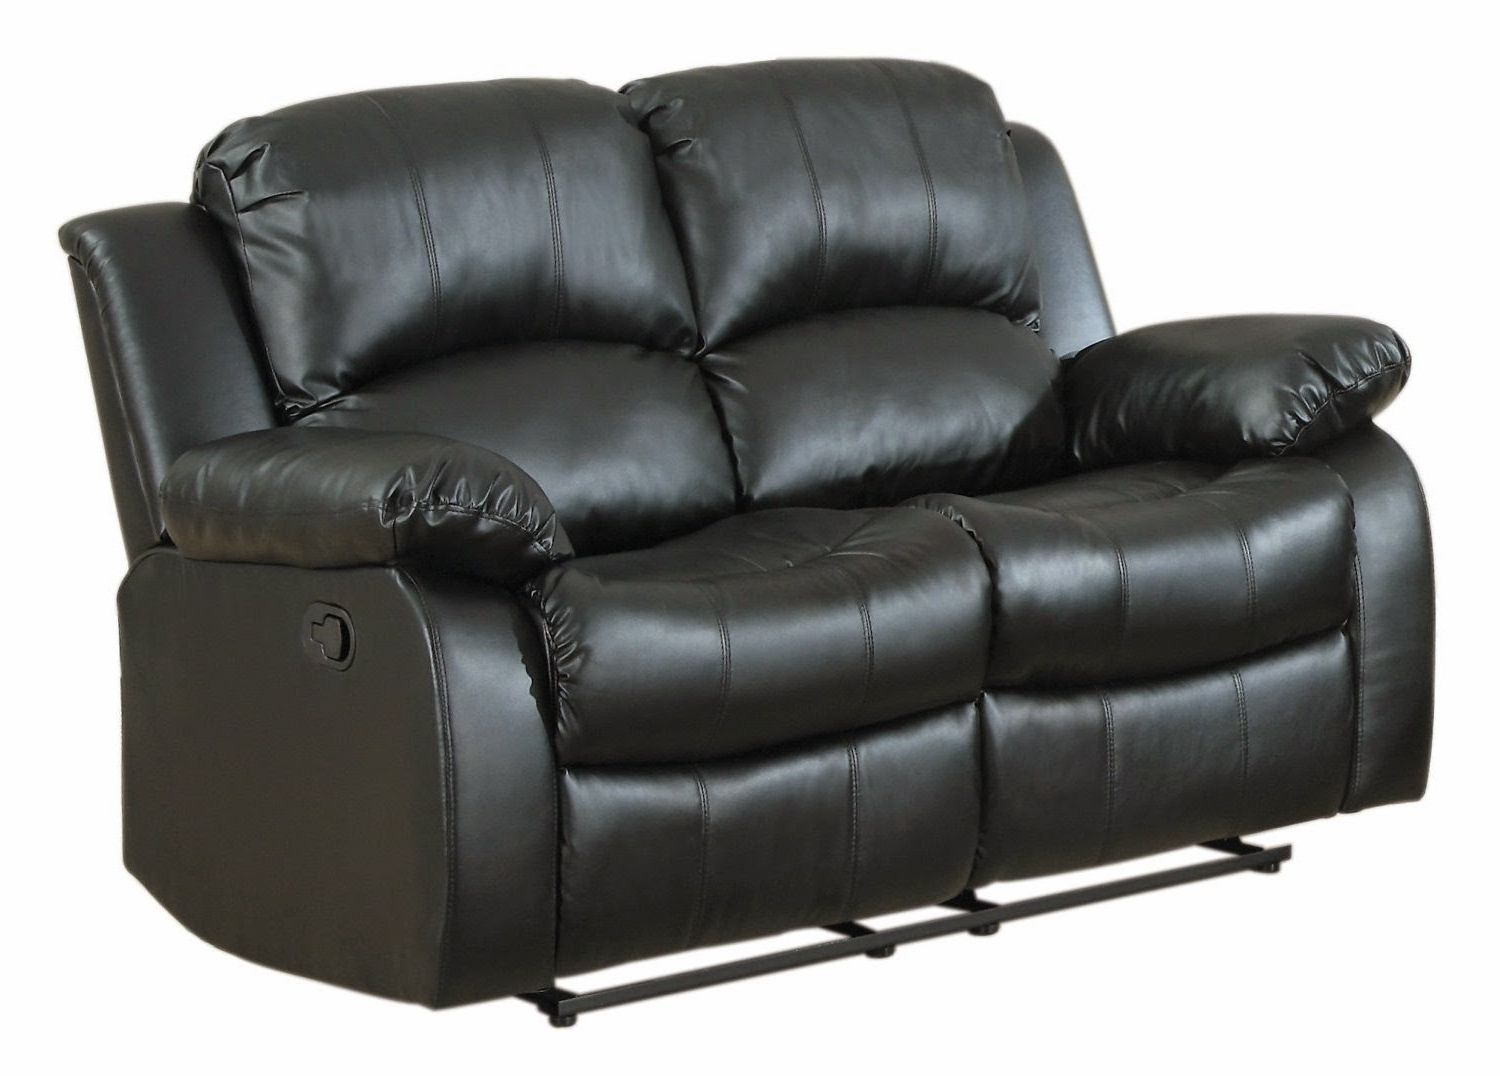 Reclining Sofas For Sale: Berkline Leather Reclining Sofa Costco With Well Known Berkline Sofas (View 10 of 15)